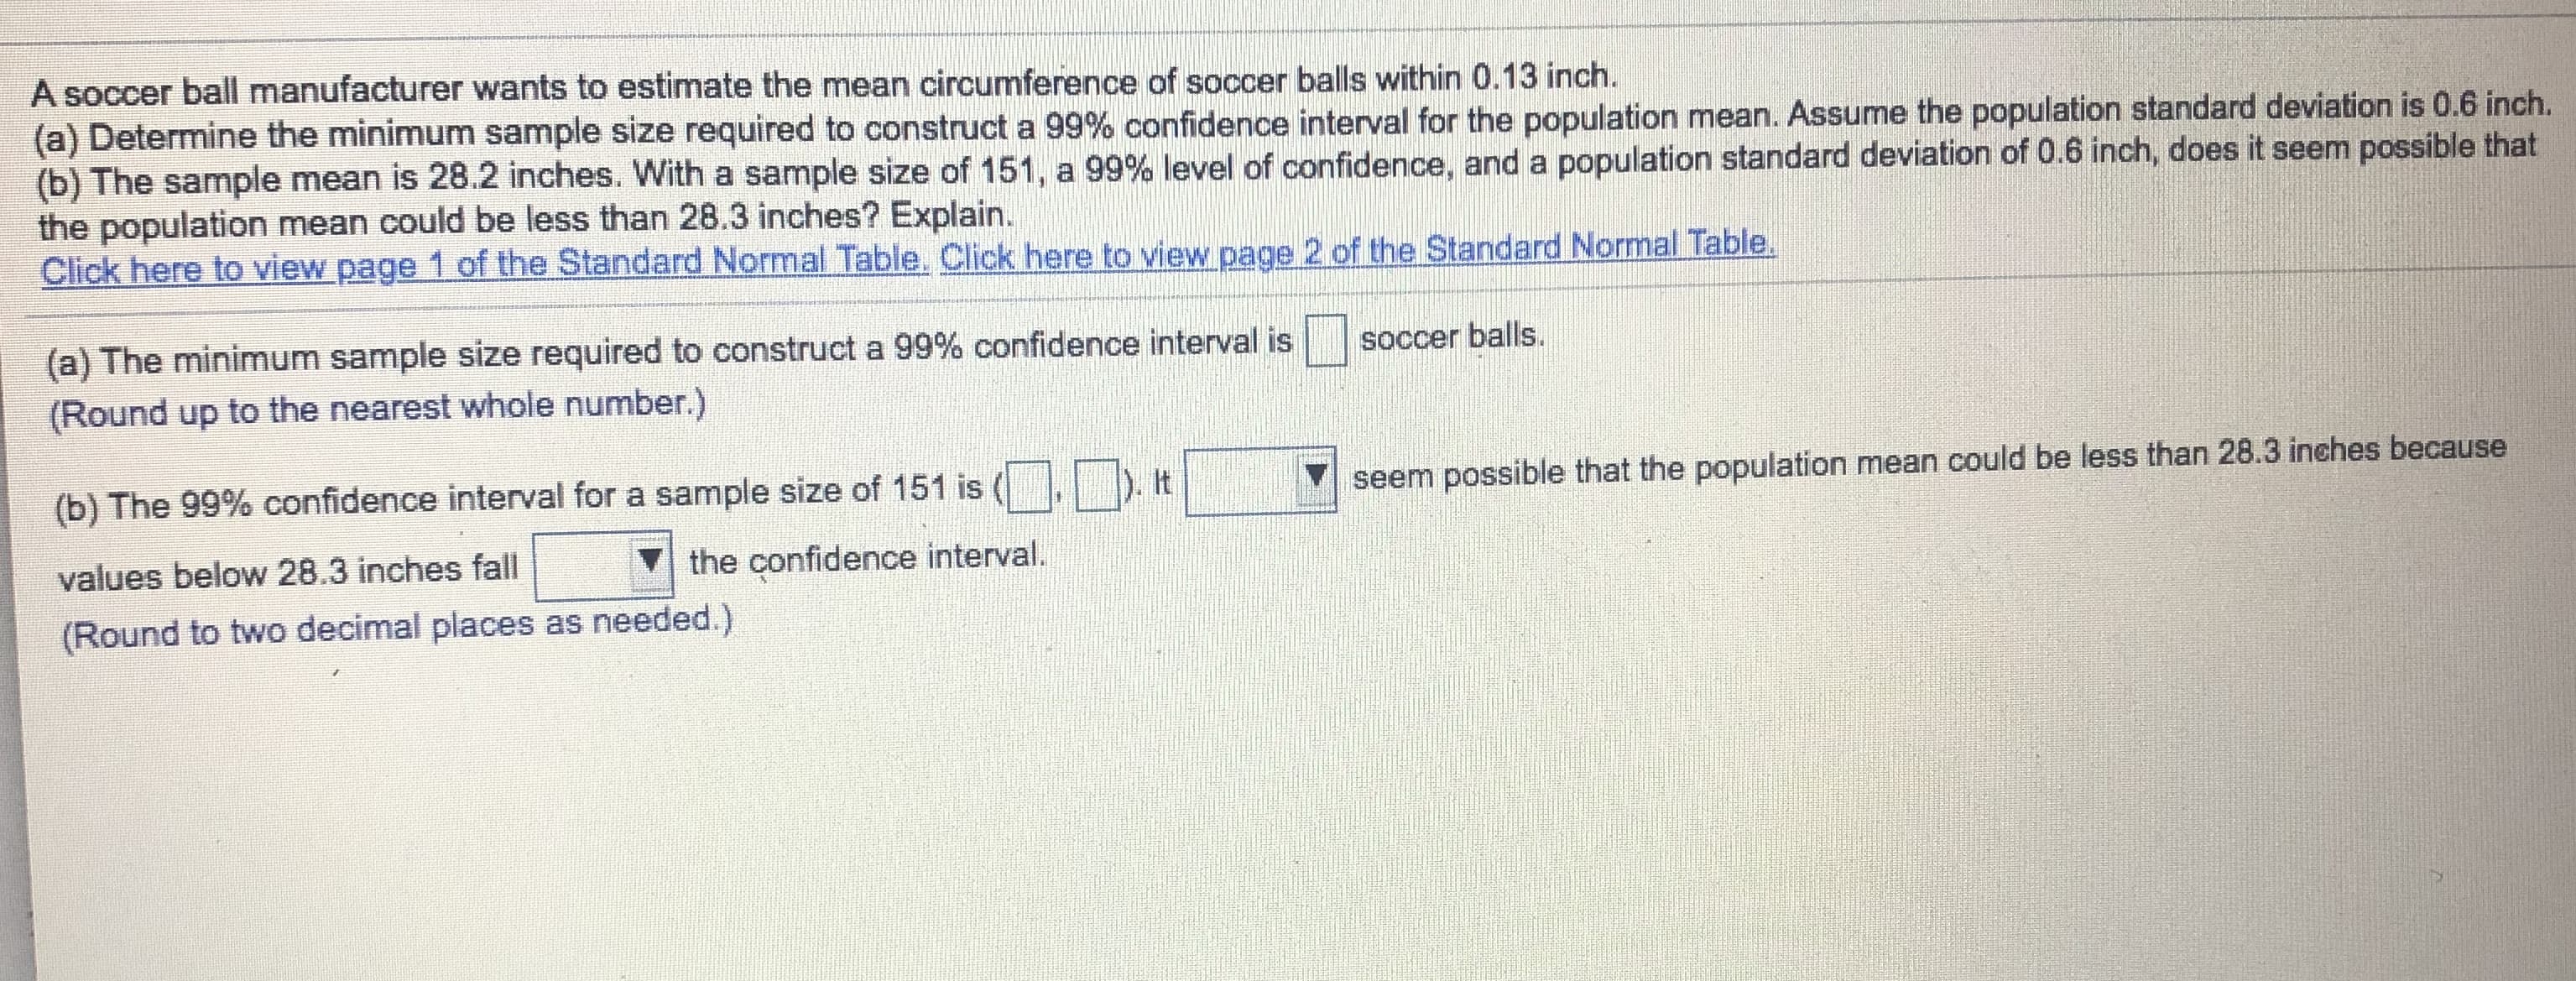 A soccer ball manufacturer wants to estimate the mean circumference of soccer balls within 0.13 inch.
(a) Determine the minimum sample size required to construct a 99% confidence interval for the population mean. Assume the population standard deviation is 0.6 inch.
(b) The sample mean is 28.2 inches. With a sample size of 151, a 99% level of confidence, and a population standard deviation of 0.6 inch, does it seem possible that
the population mean could be less than 28.3 inches? Explain.
Click here to view page 1 of the Standard Normal Table. Click here to view page 2 of the Standard Normal Table.
(a) The minimum sample size required to construct a 99% confidence interval is
soccer balls.
(Round up to the nearest whole number.)
) t
(b) The 99% confidence interval for a sample size of 151 is
seem possible that the population mean could be less than 28.3 inches because
values below 28.3 inches fall
the confidence interval.
(Round to two decimal places as needed.)
